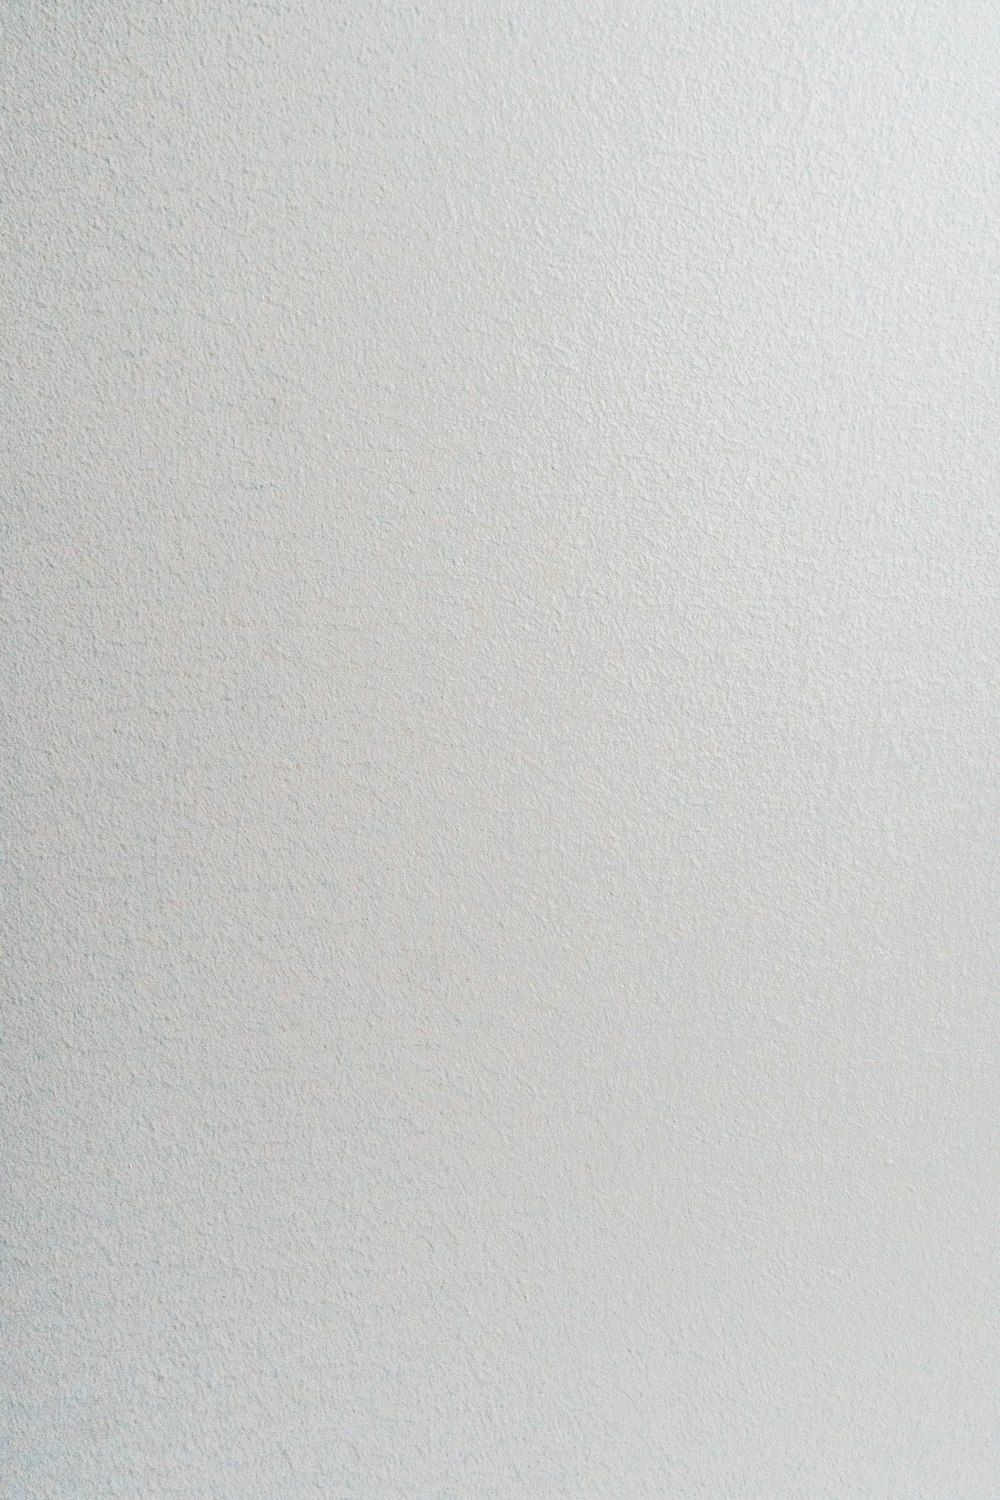 white wall paint with white paint